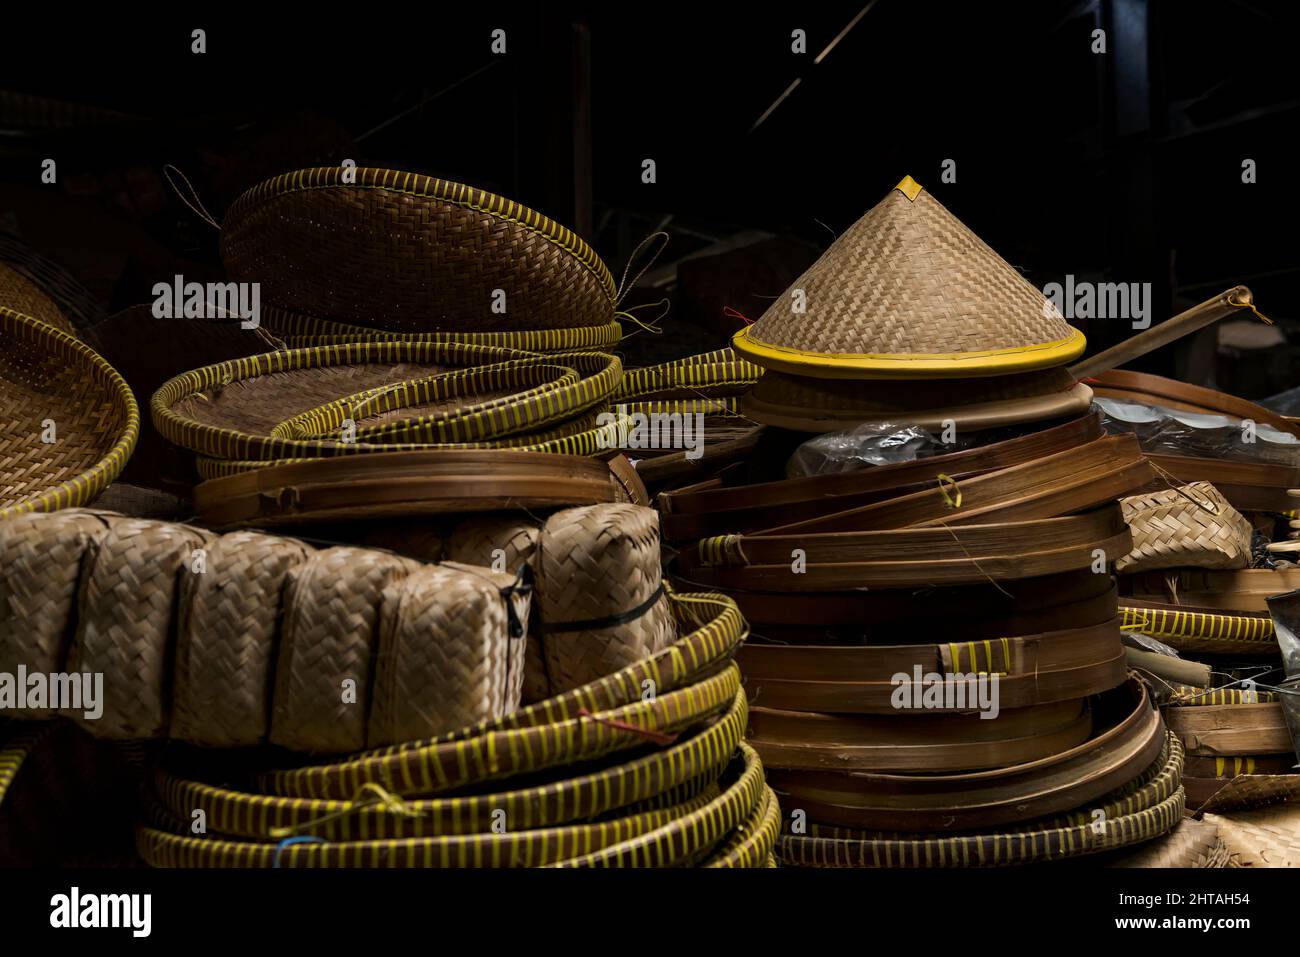 Conical hat, bamboo basket and trays Stock Photo